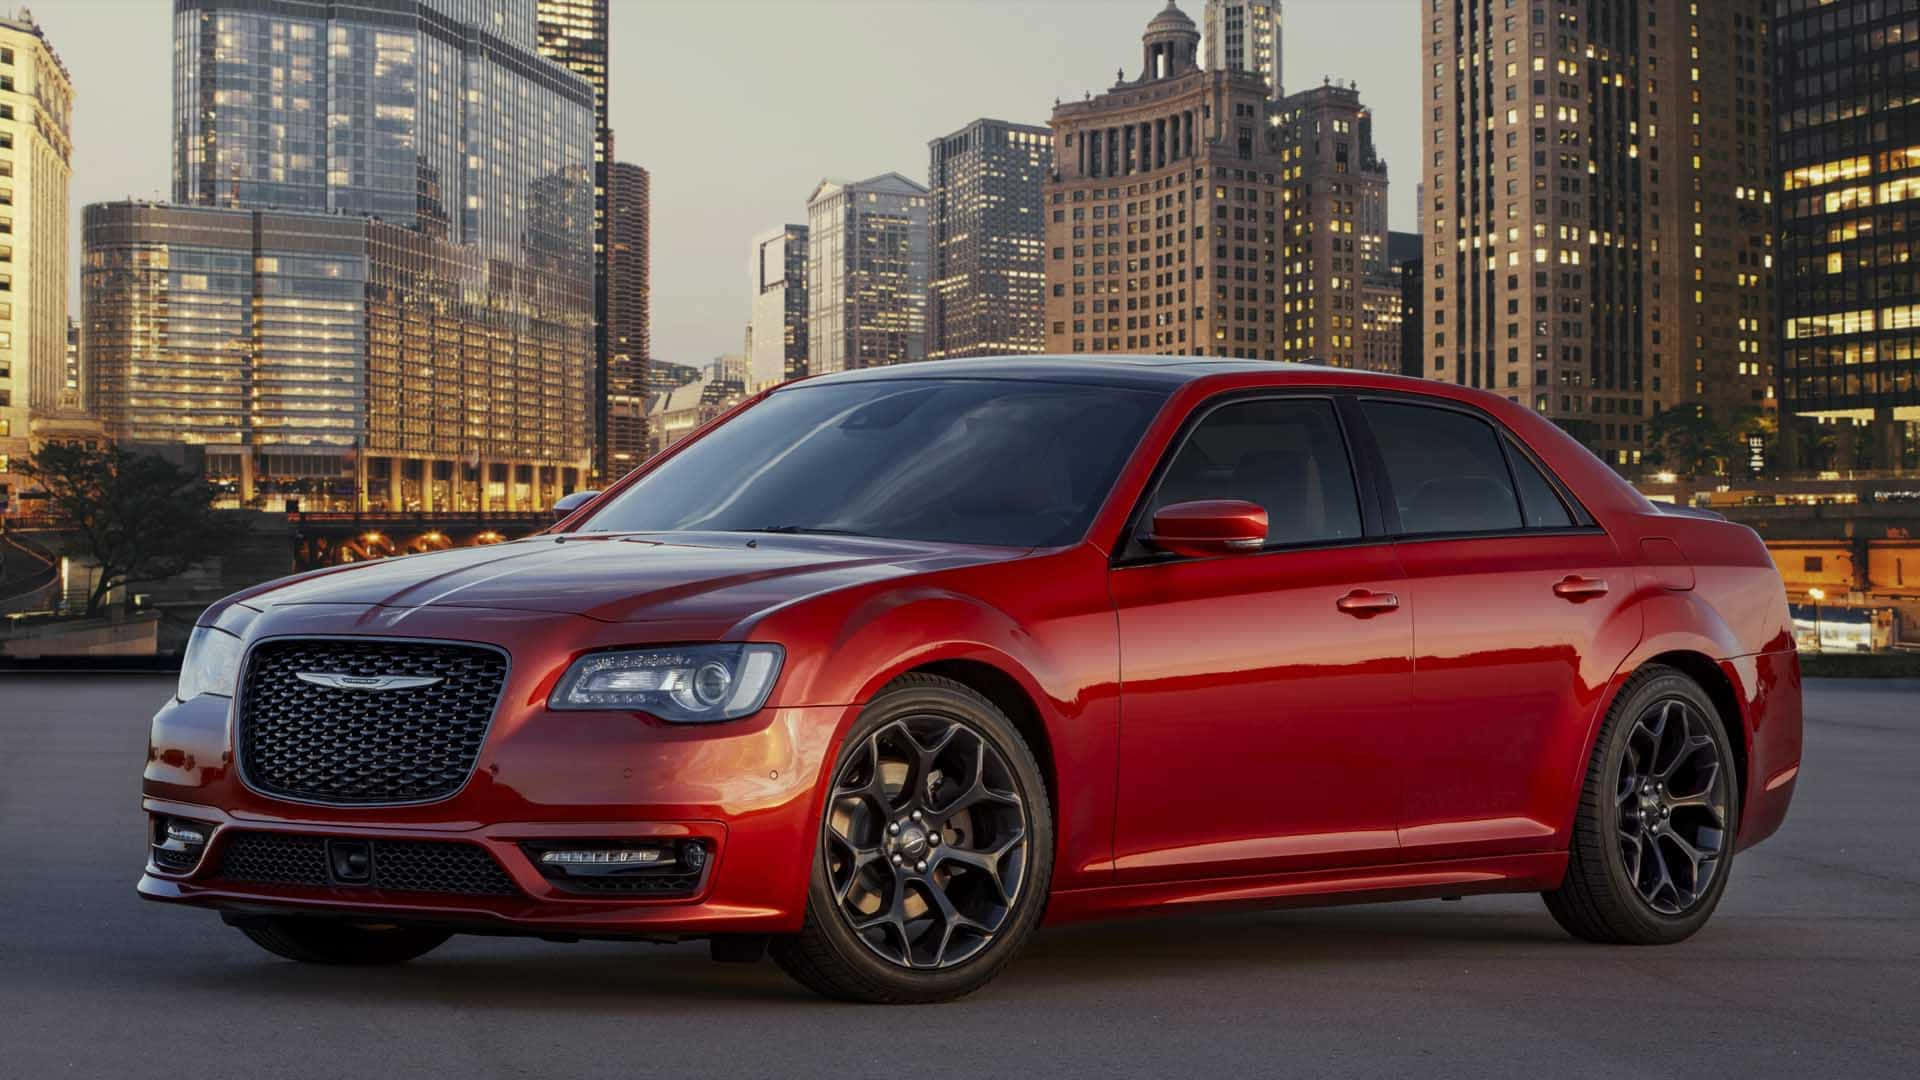 The Red Chrysler 300 Is Parked In Front Of A City